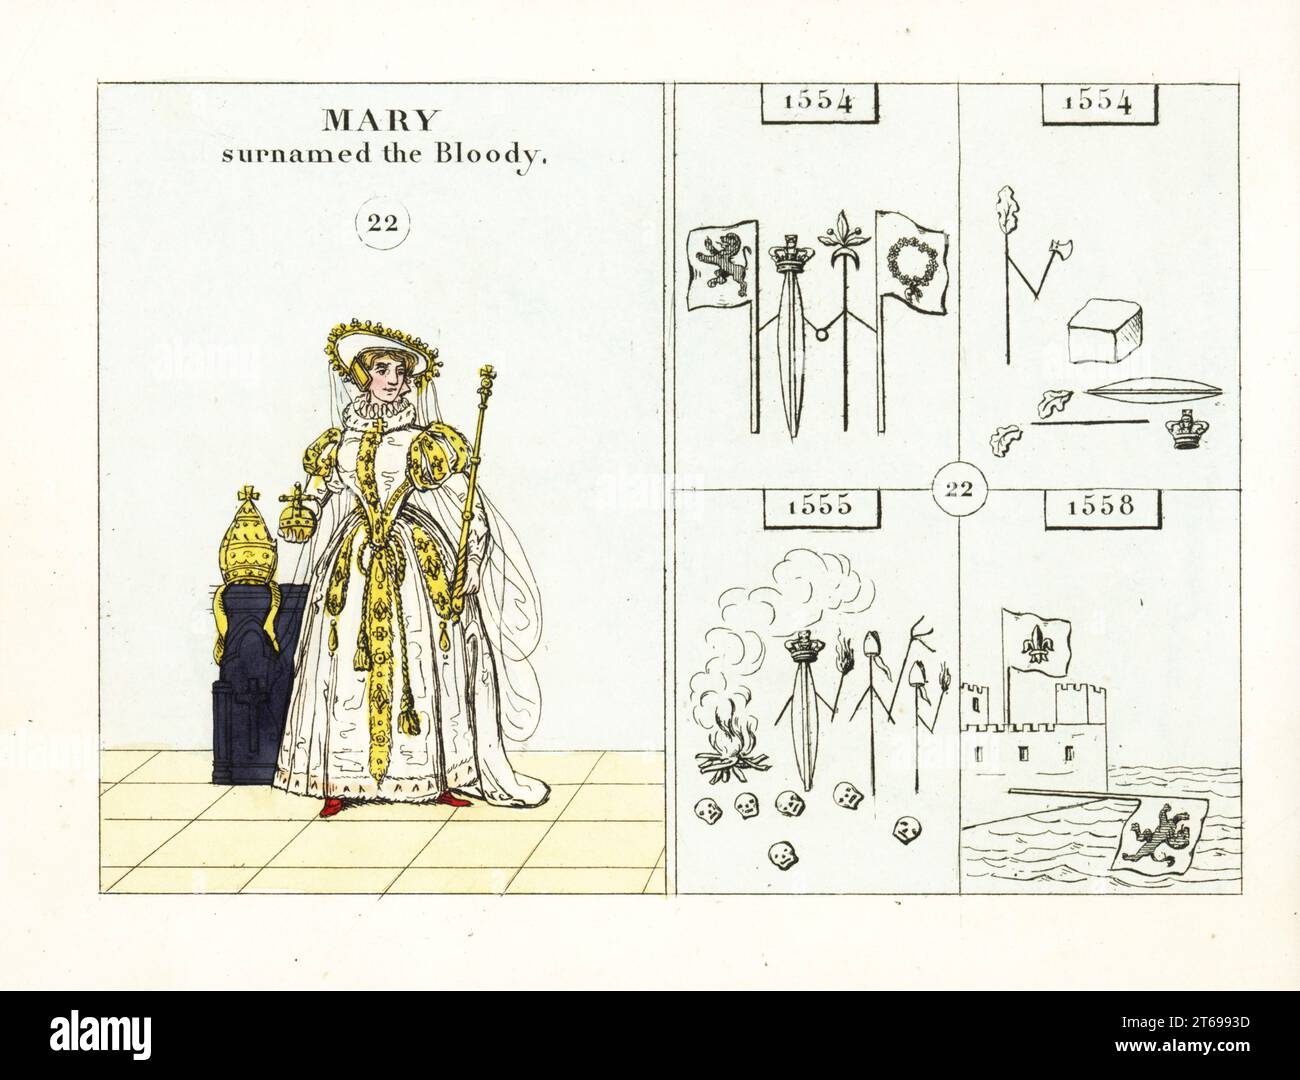 Portrait of Queen Mary of England, Bloody Mary. Dressed in a gold and white dress and hat, holding orb and sceptre. Emblems indicate her marriage to Philip of Spain, execution of Lady Jane Grey, restoration of the Catholic religion, and the French taking Calais. Handcoloured steel engraving after an illustration by Mary Ann Rundall from A Symbolical History of England, from Early Times to the Reign of William IV, J.H. Truchy, Paris, 1839. Mary Ann Rundall was a teacher of young ladies in Bath, and published her book of mnemonic emblems in 1815. Stock Photo